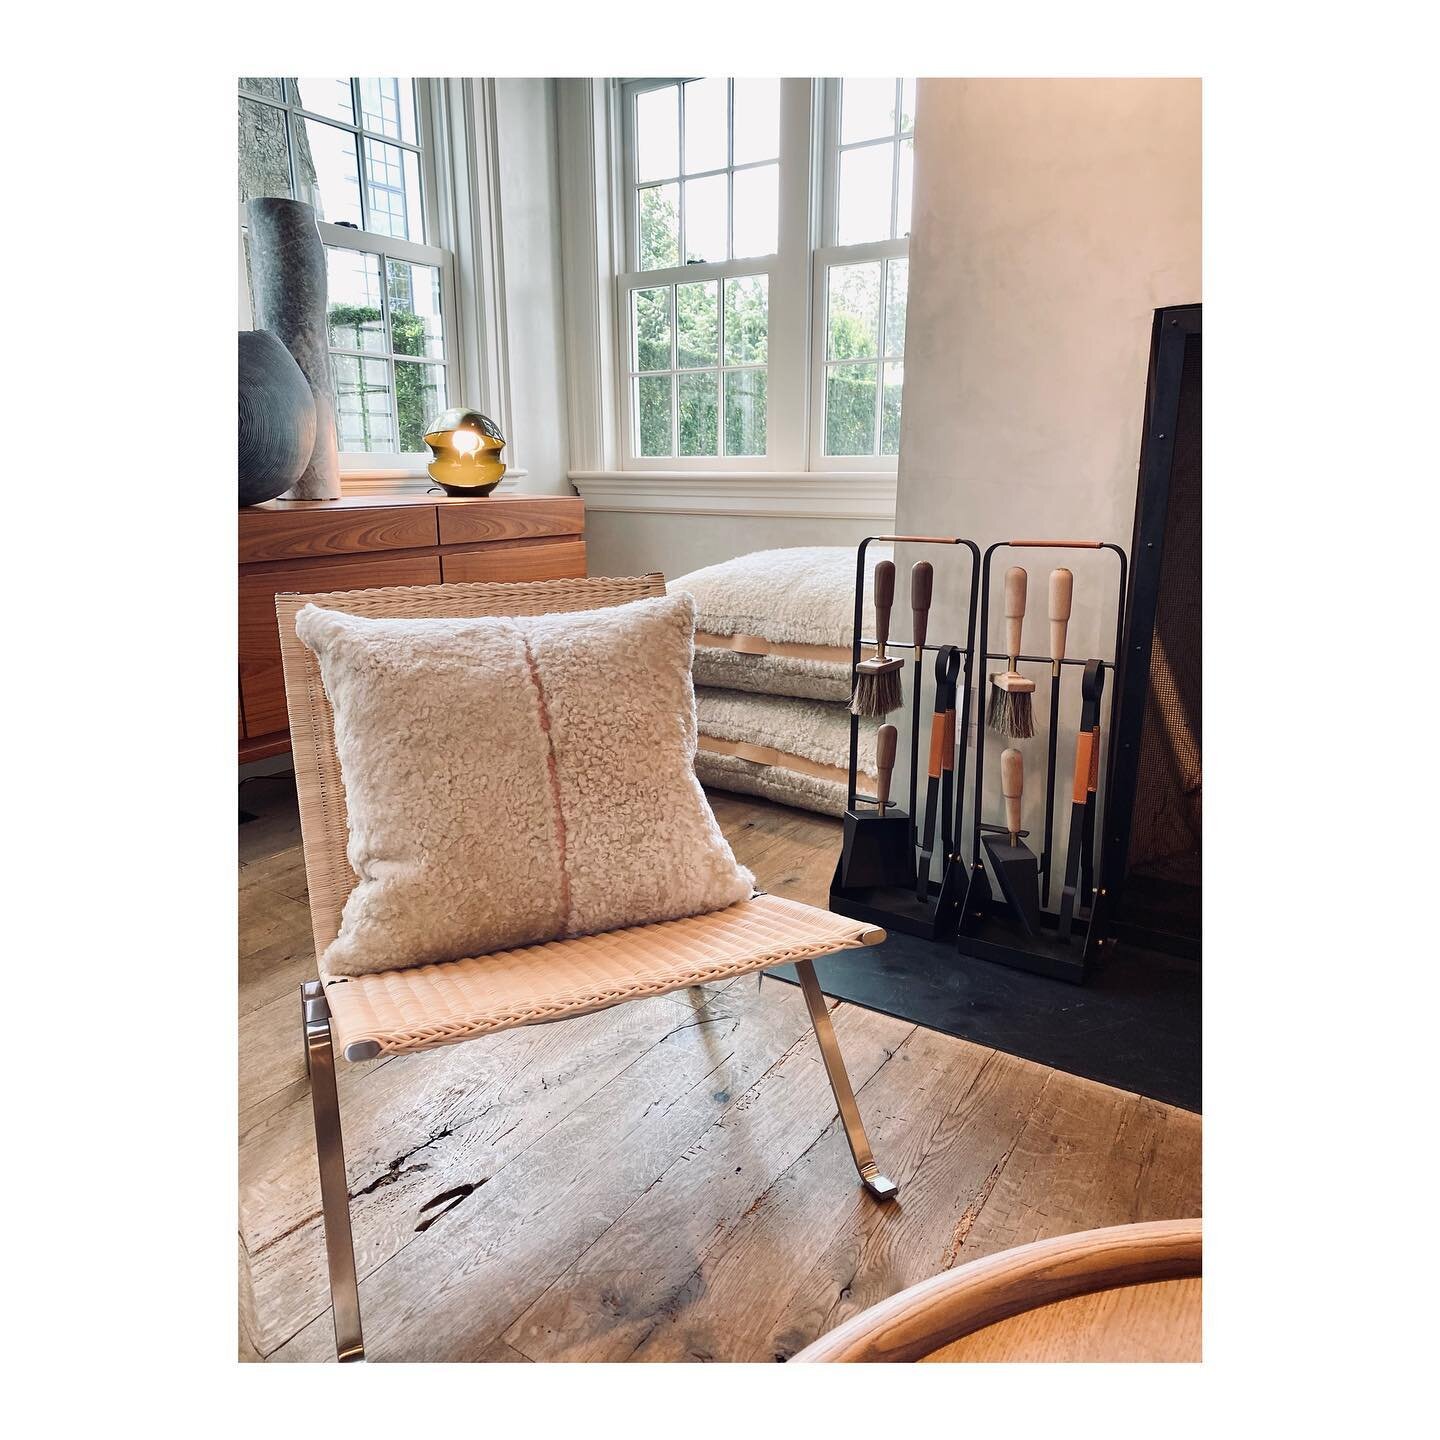 Truly inspiring. Poetically curated. Find your flame 🔥 At @moncxiii 

#mosesnadel #moncxiii #texture #design #interiordesign #powerfulcuration #interiordecor #sagharbor #greenwichconnecticut #interiorlove #interiors #designanddecor #inspiredhome #ha